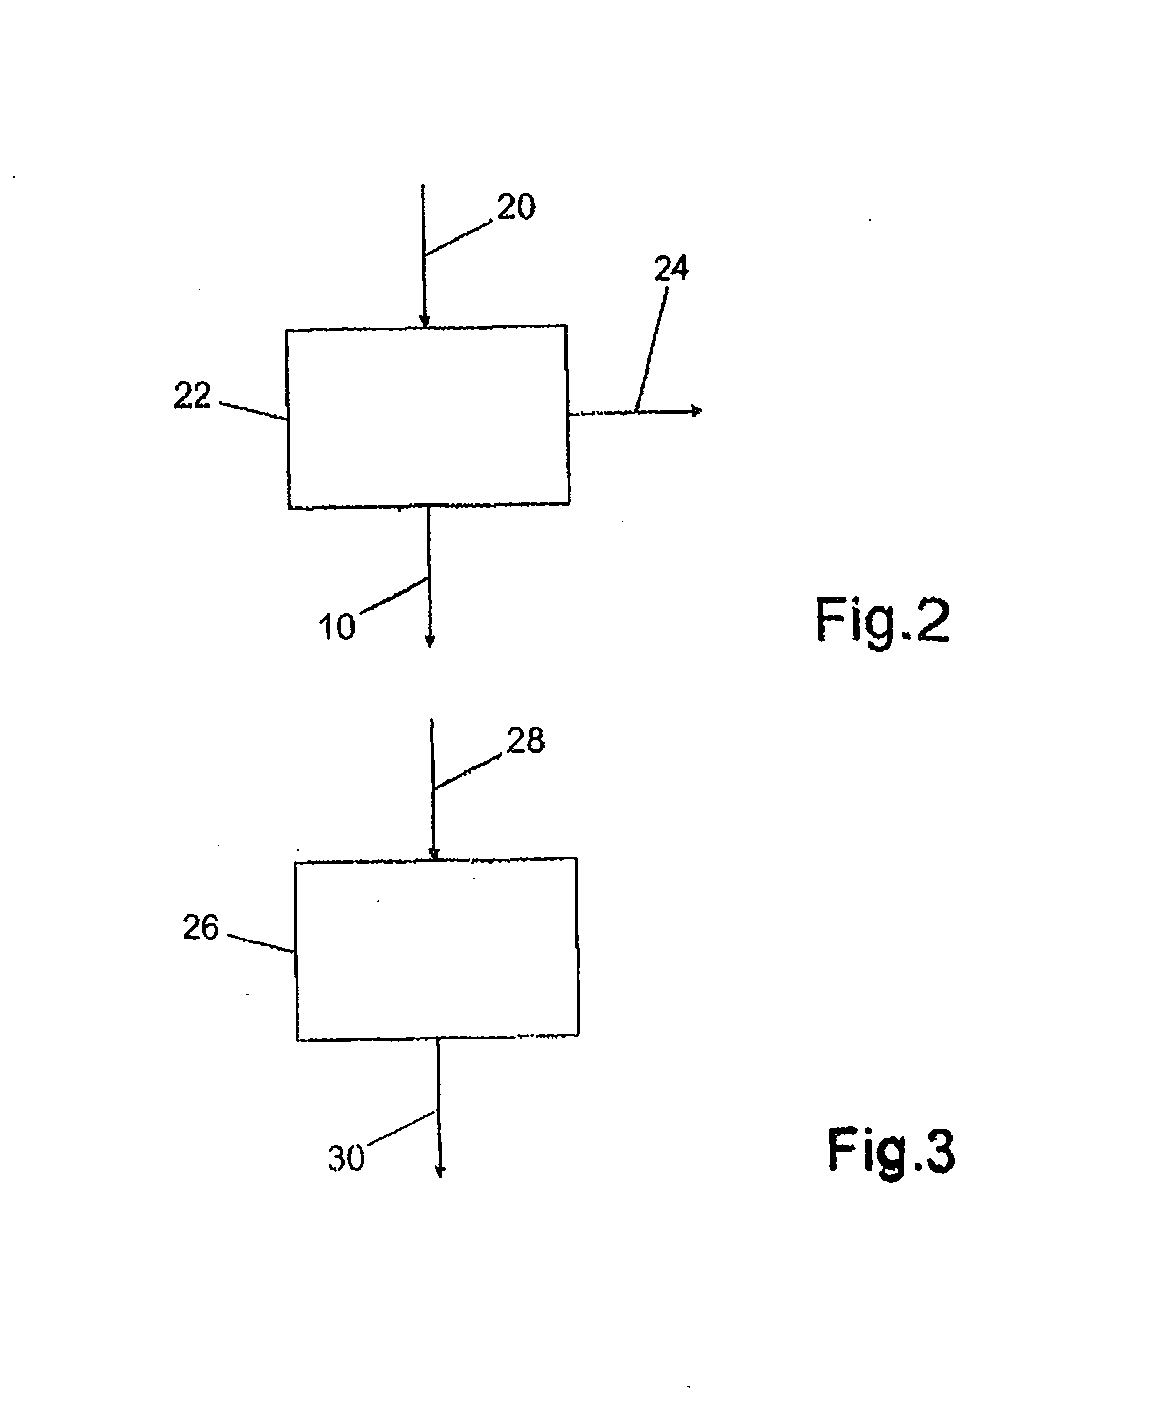 Method for recovering volatile components from a solid